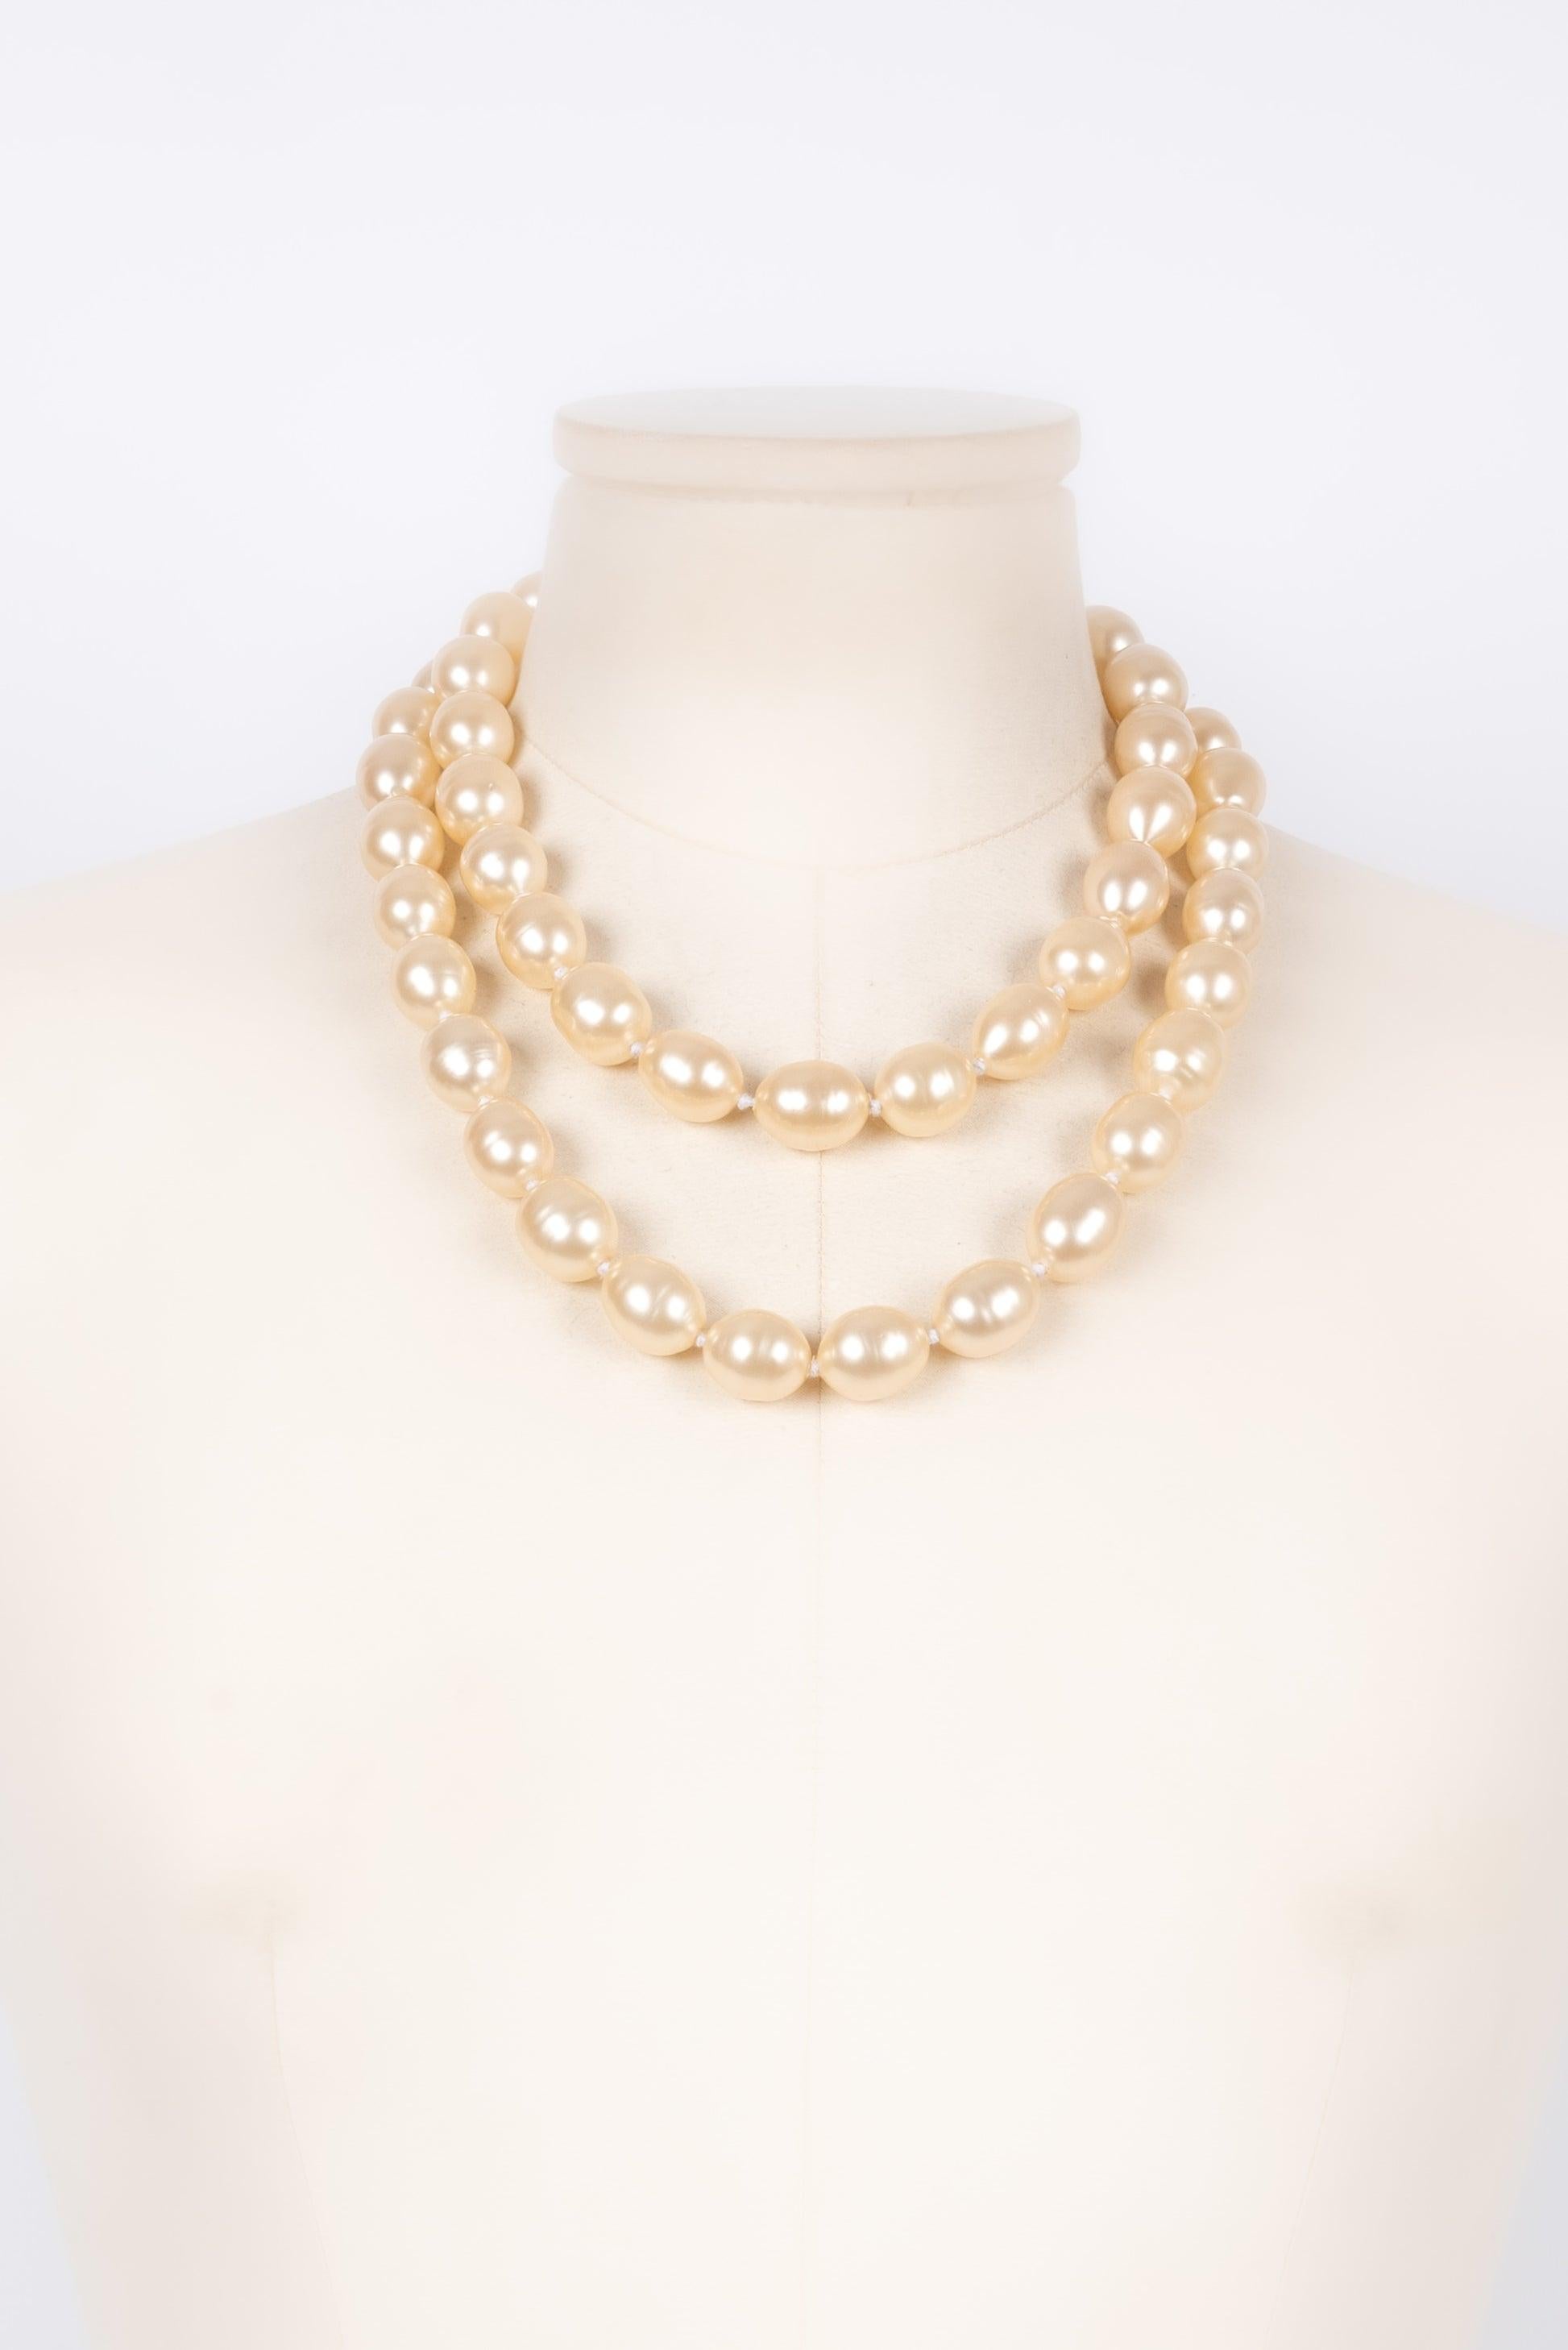 Chanel Necklace in Costume Pearly Beads and Gold-Plated Metal, 1990s For Sale 2